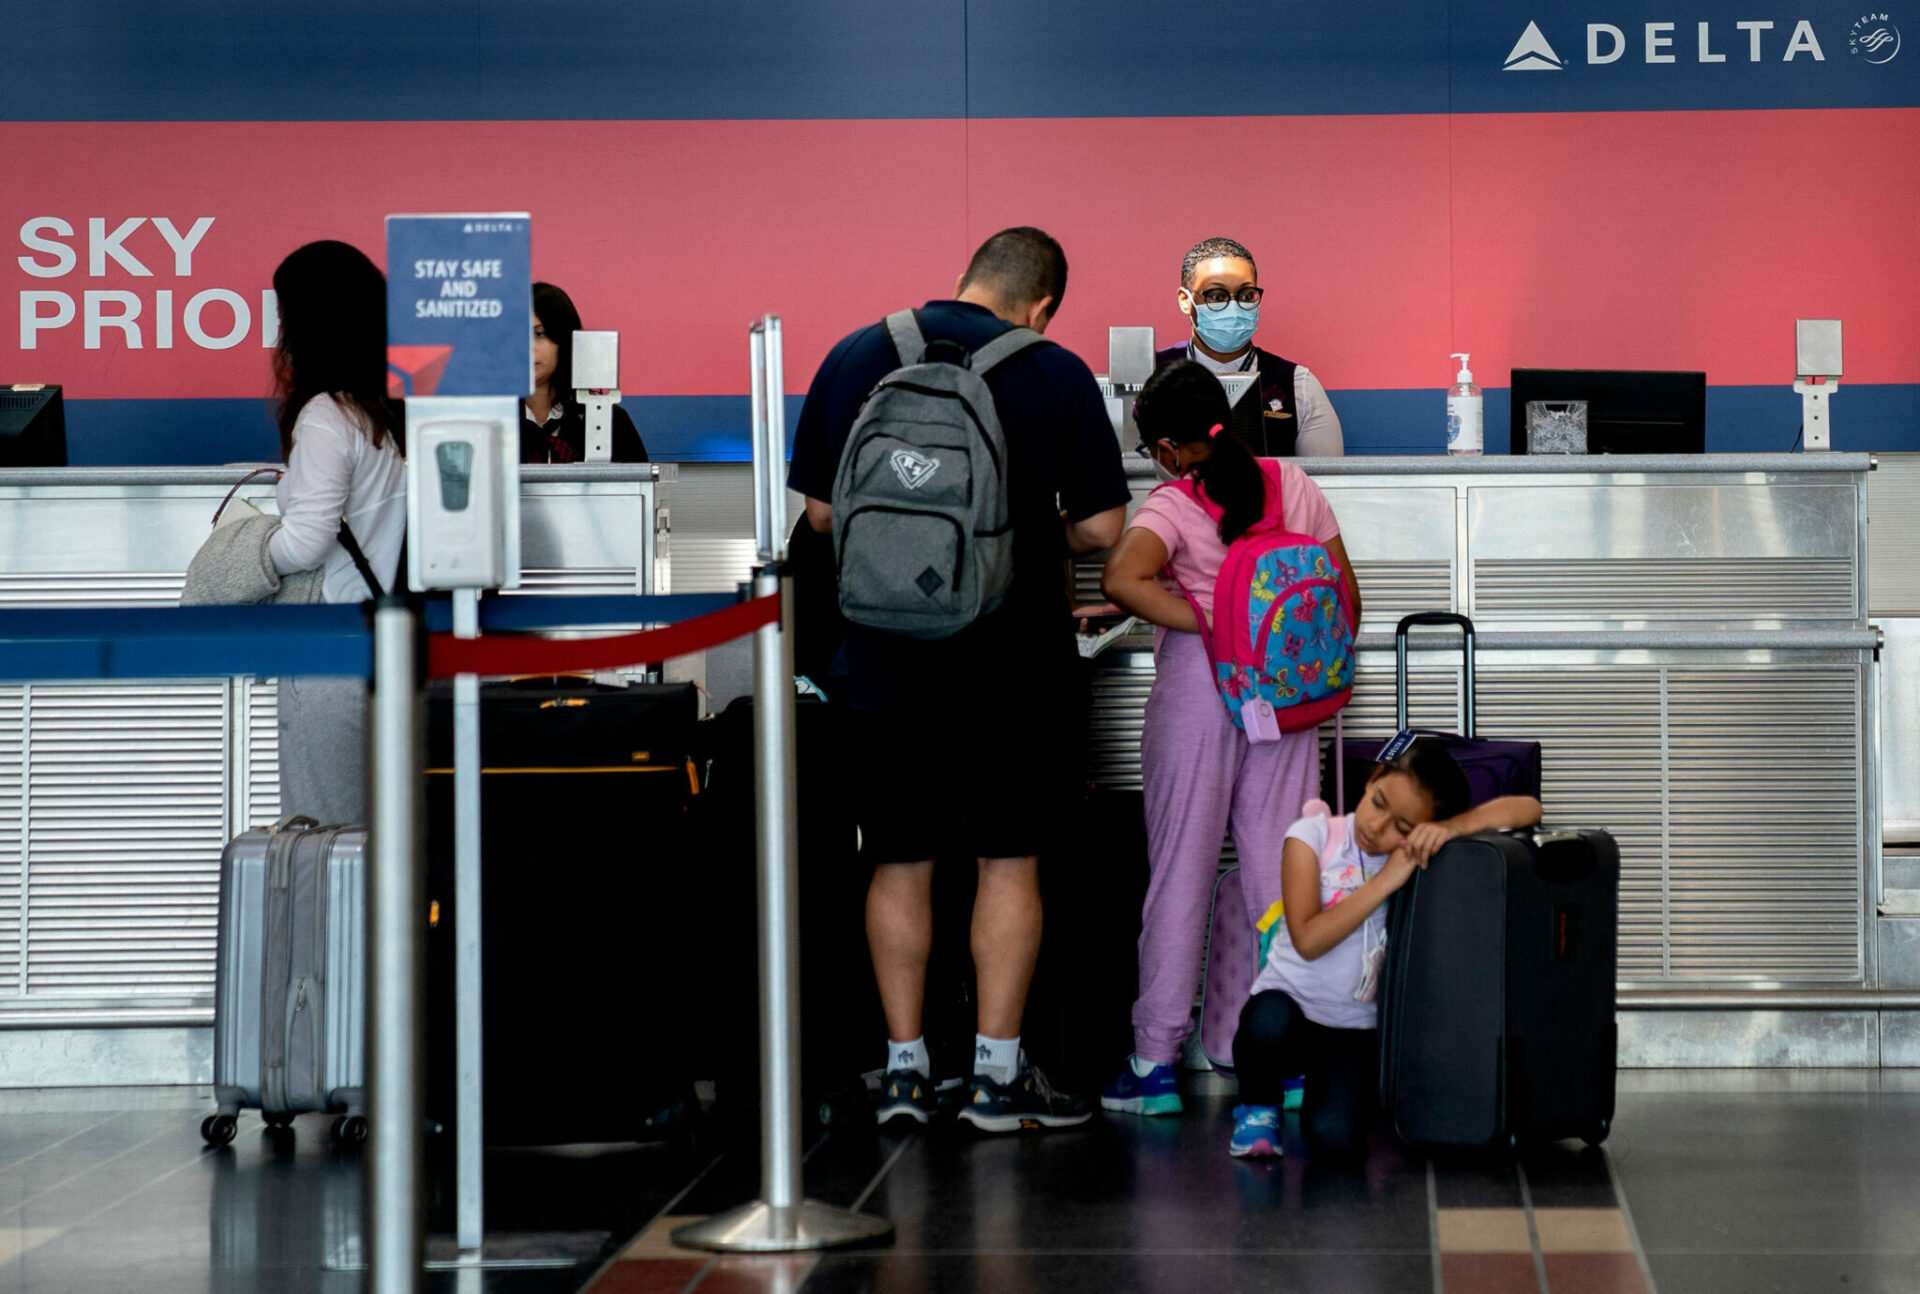 Delta offers $10,000 to passengers to give up seats on overbooked flight